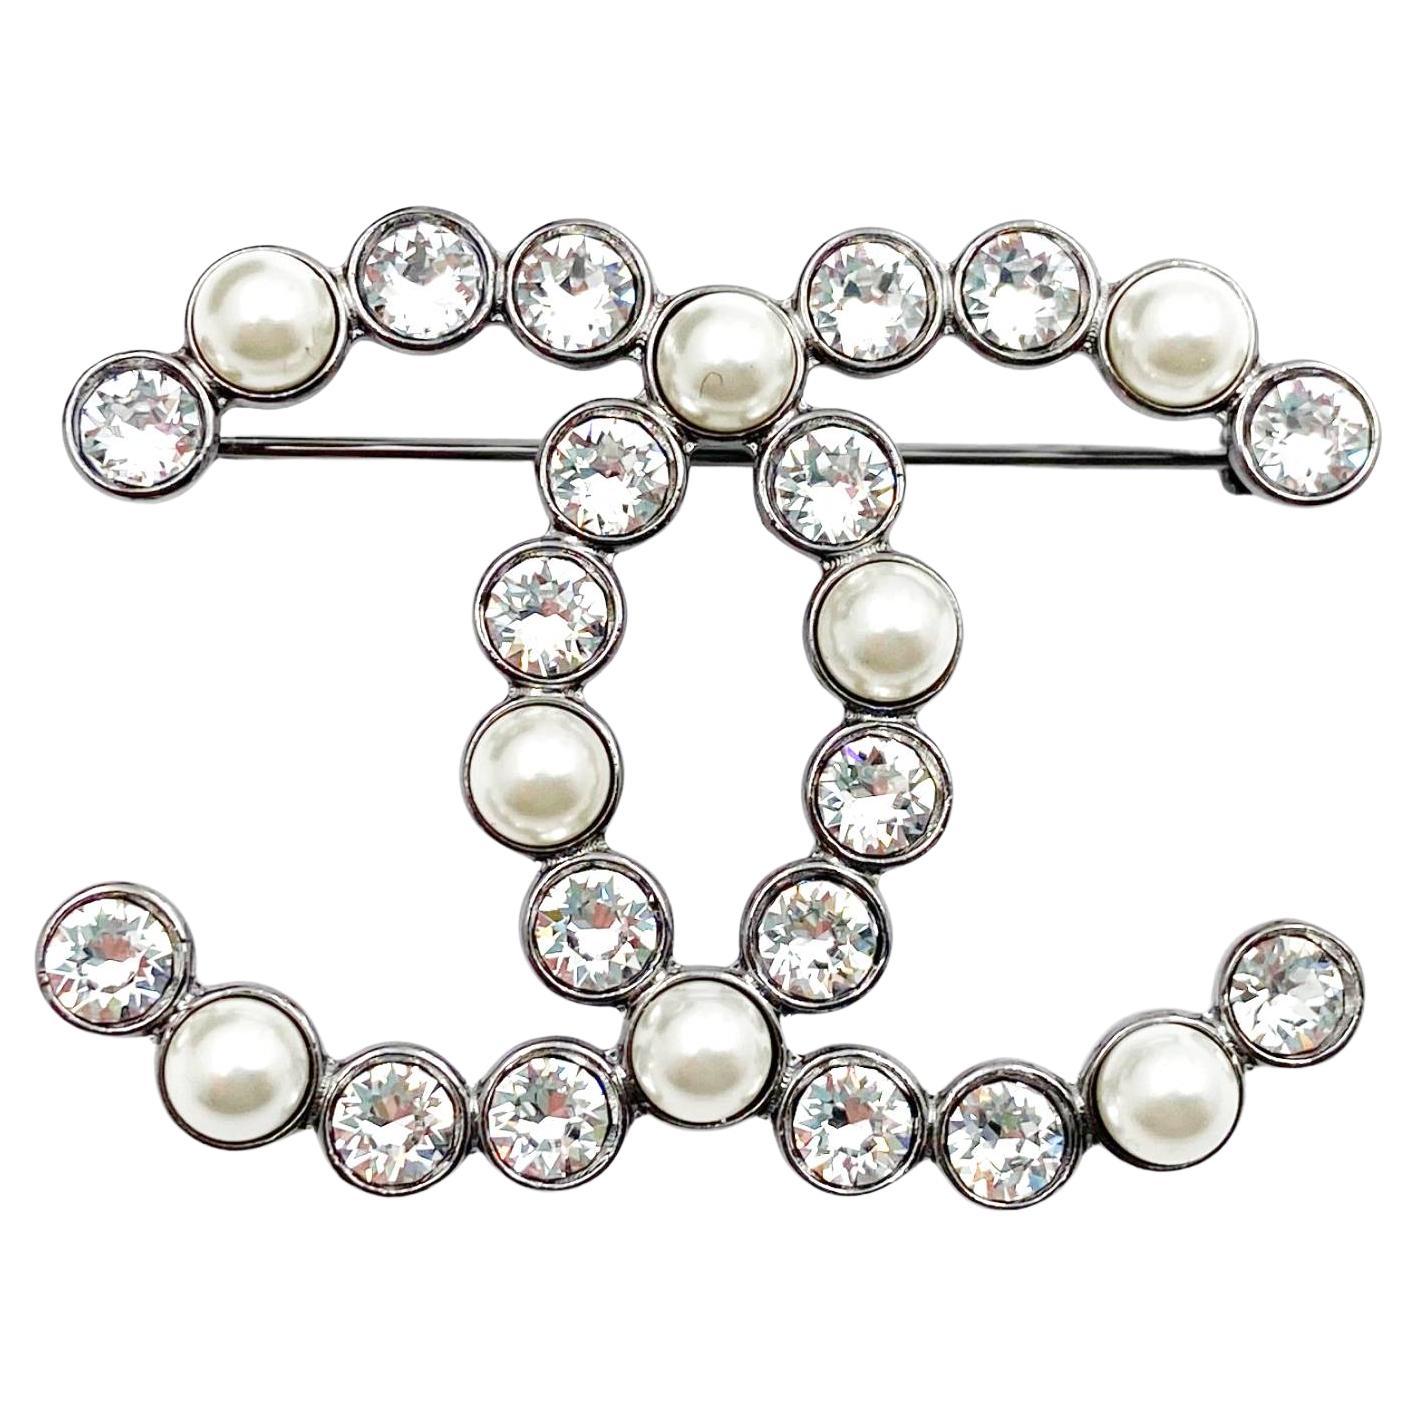 Chanel Brand New Grey CC Pearl Crystal Brooch For Sale